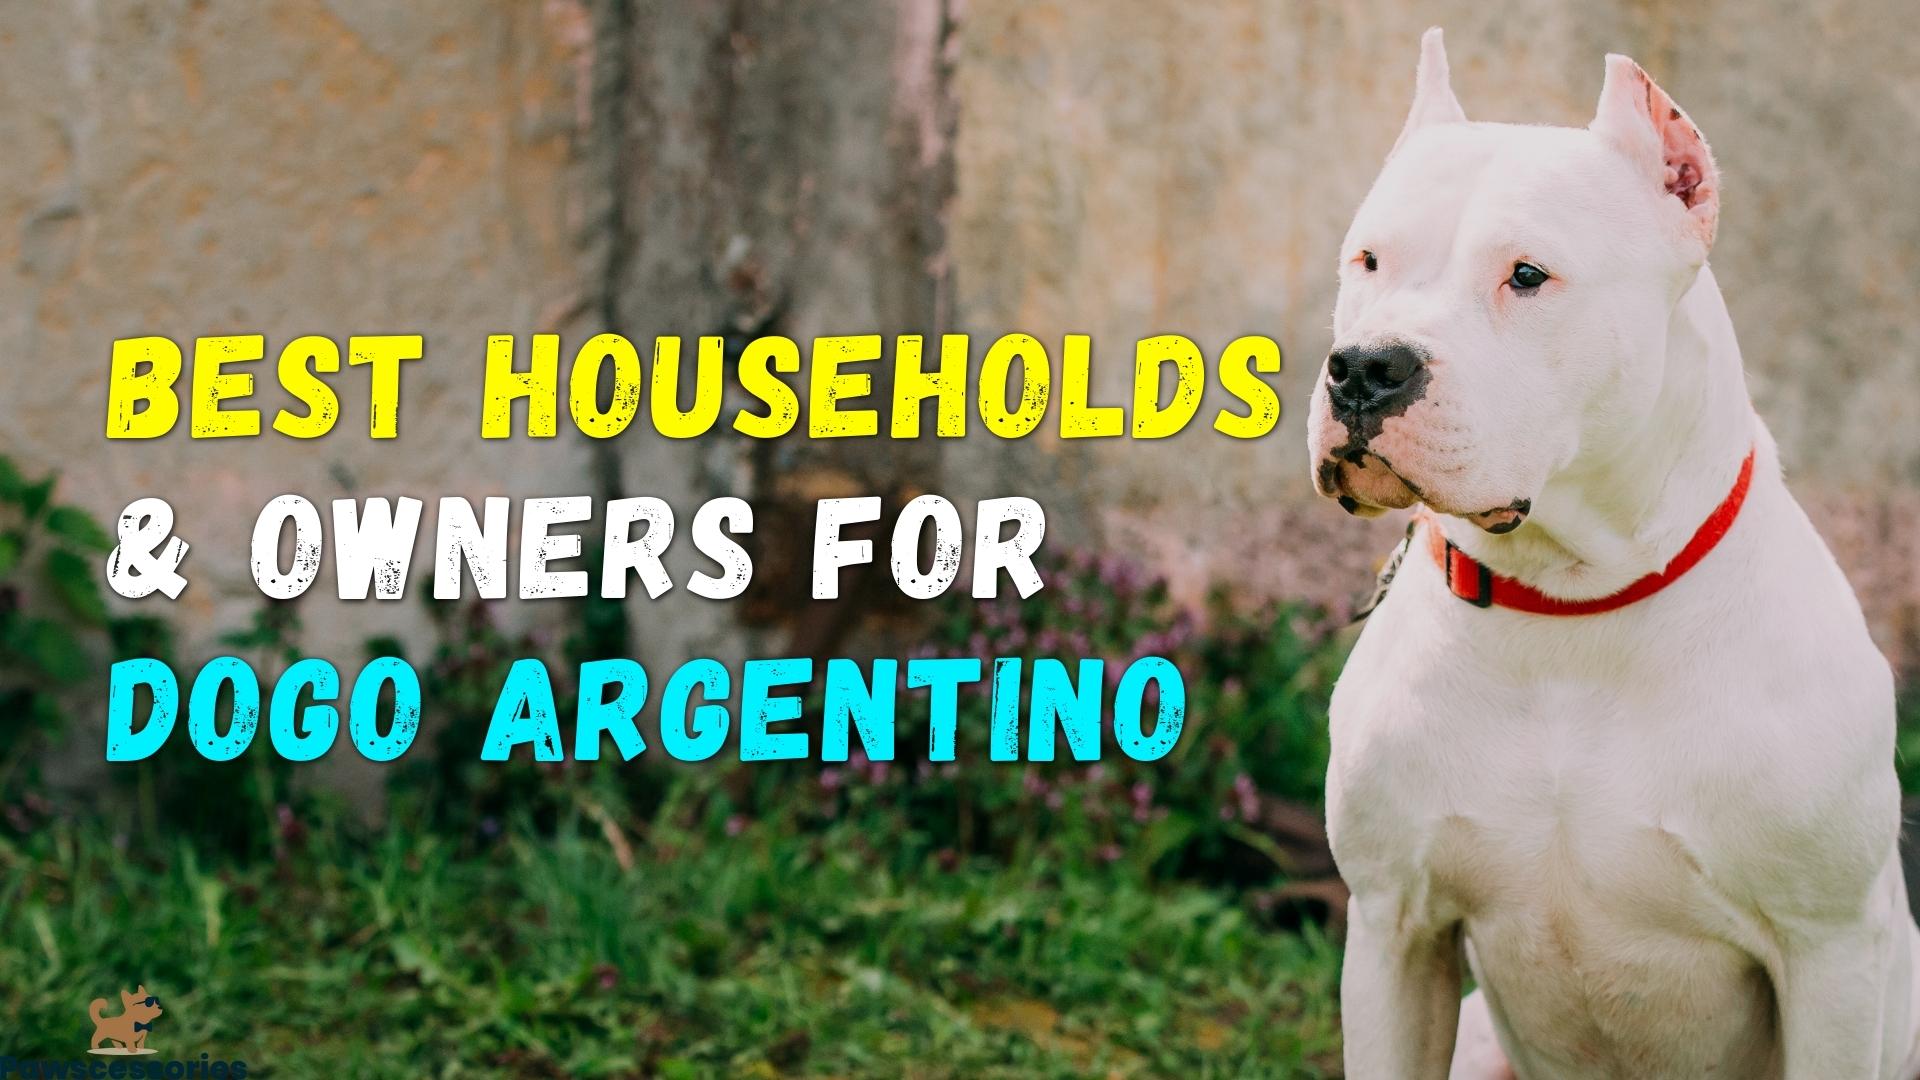 Dogo Argentino: The Best Households & Owners for Them